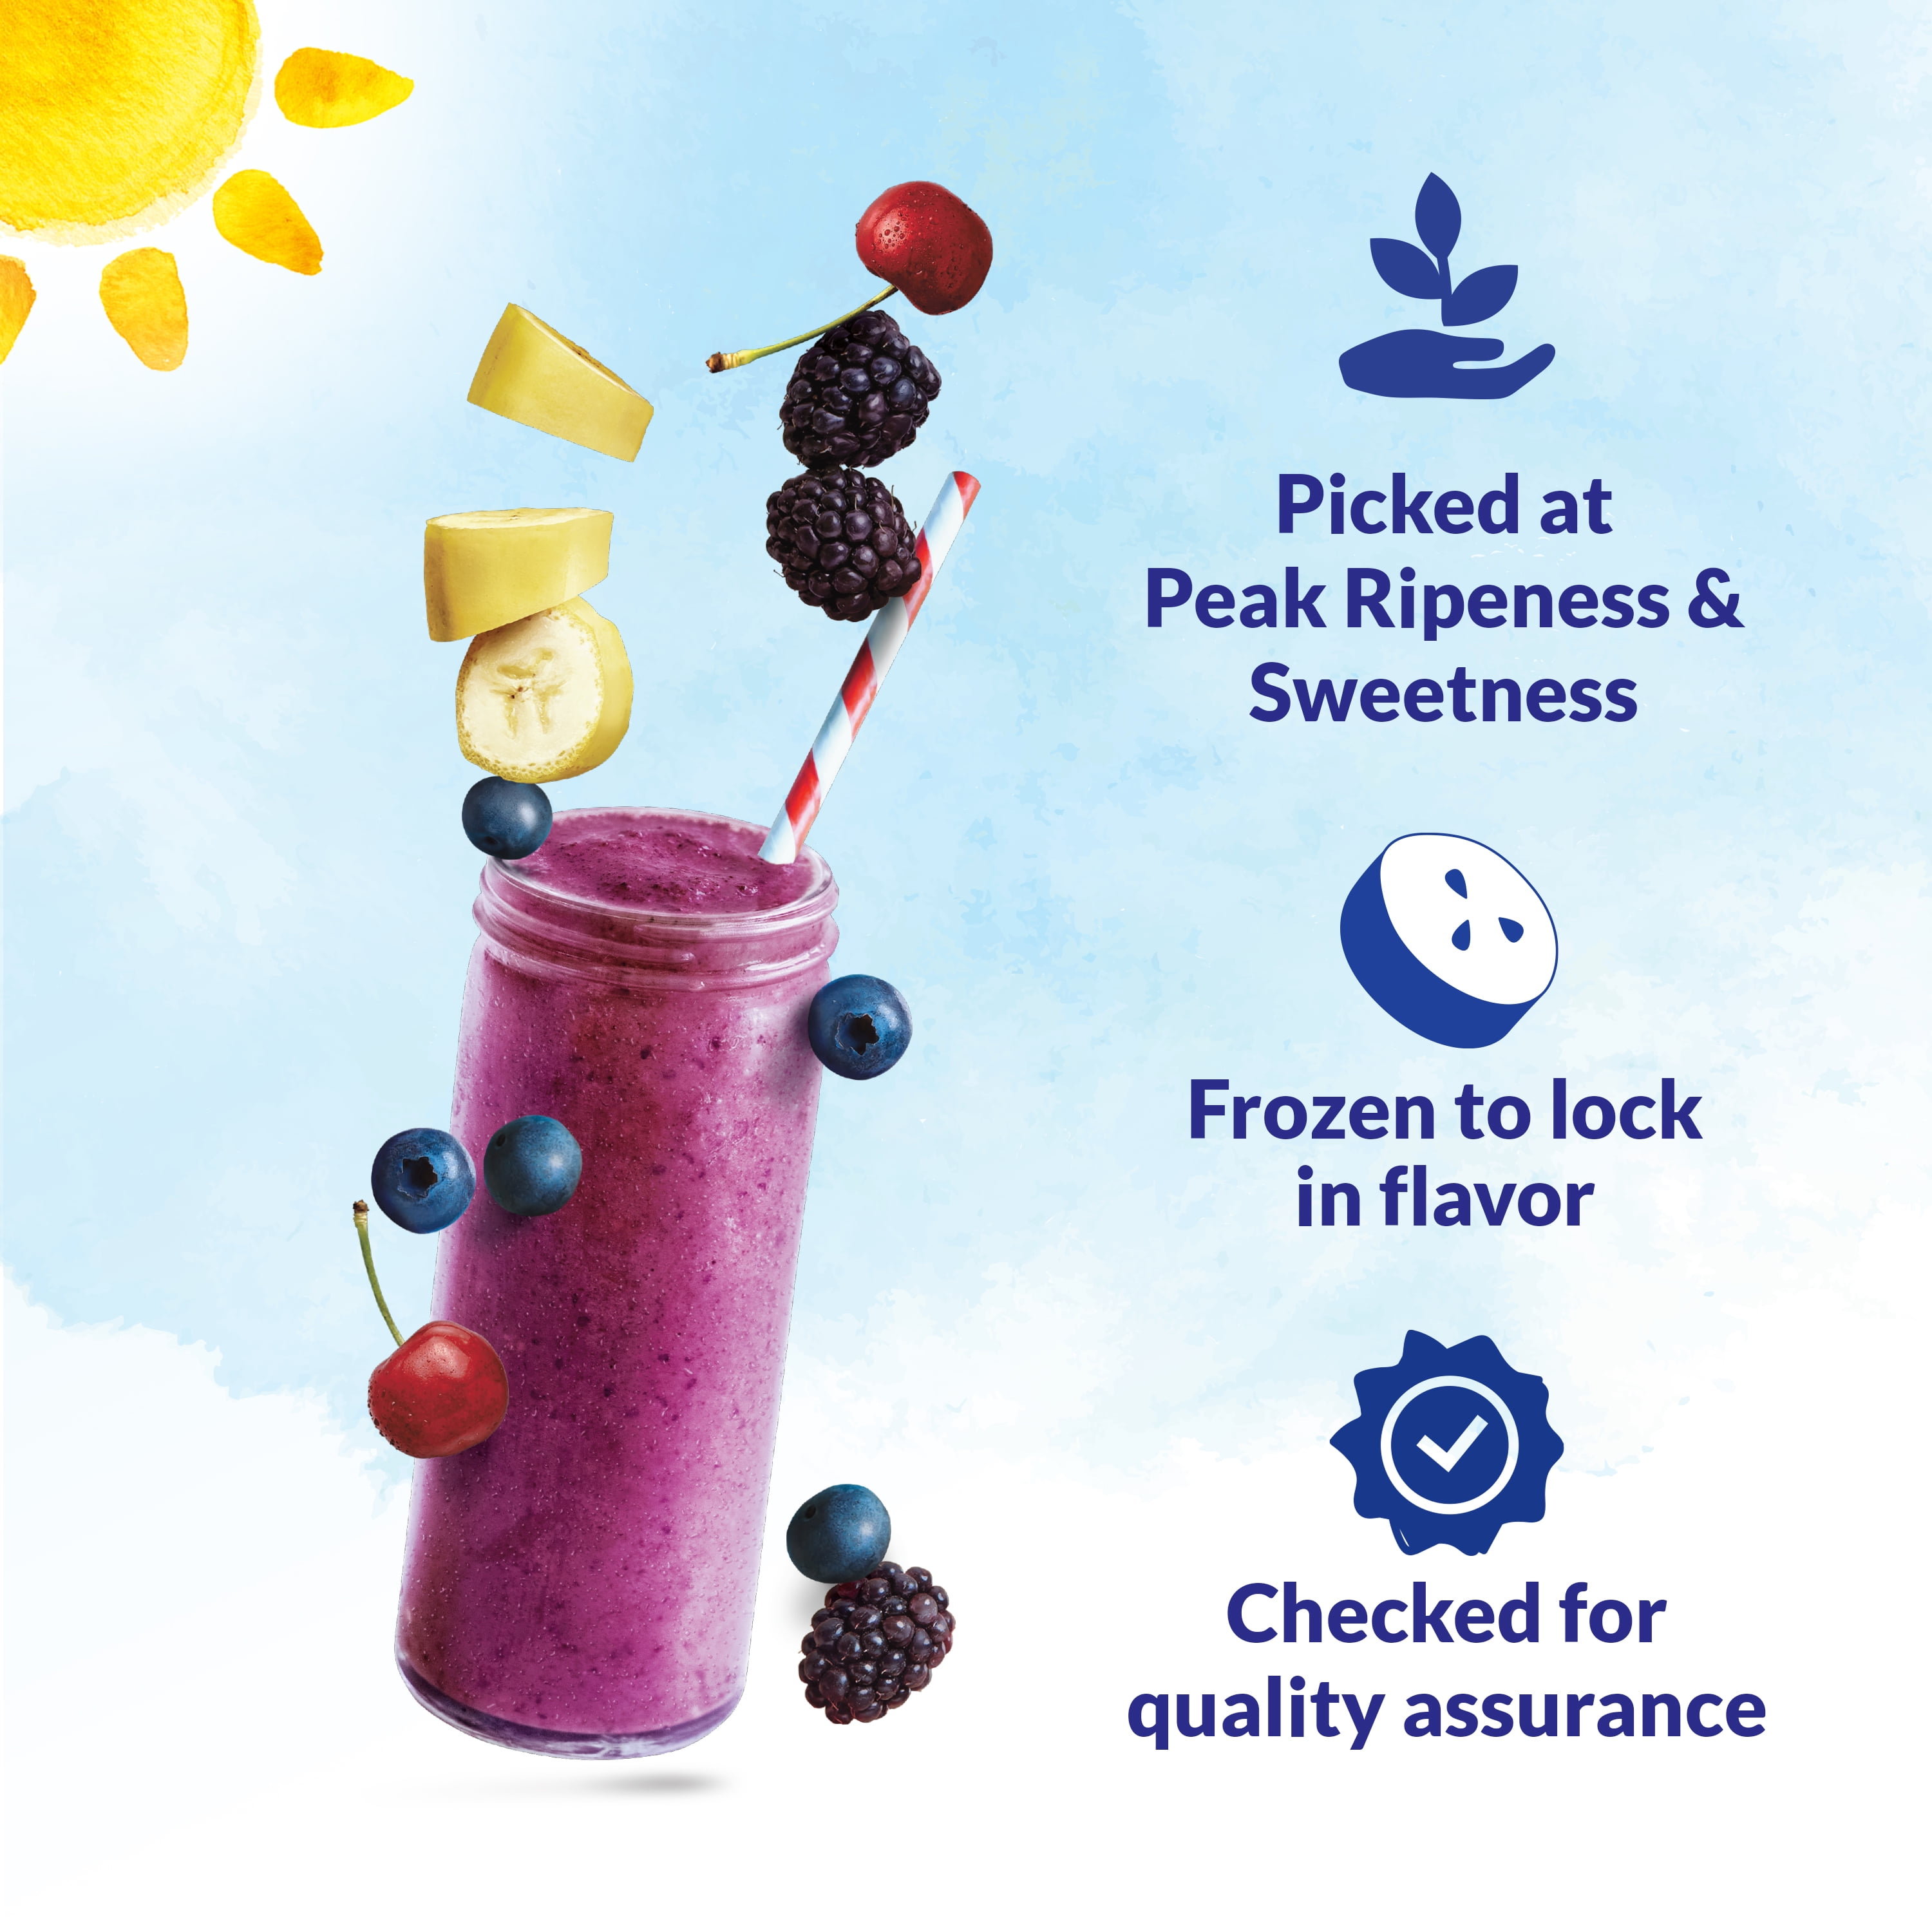 Dole Boosted Blends Frozen Blueberry and Banana Protein Smoothie Blend, 32  oz Bag